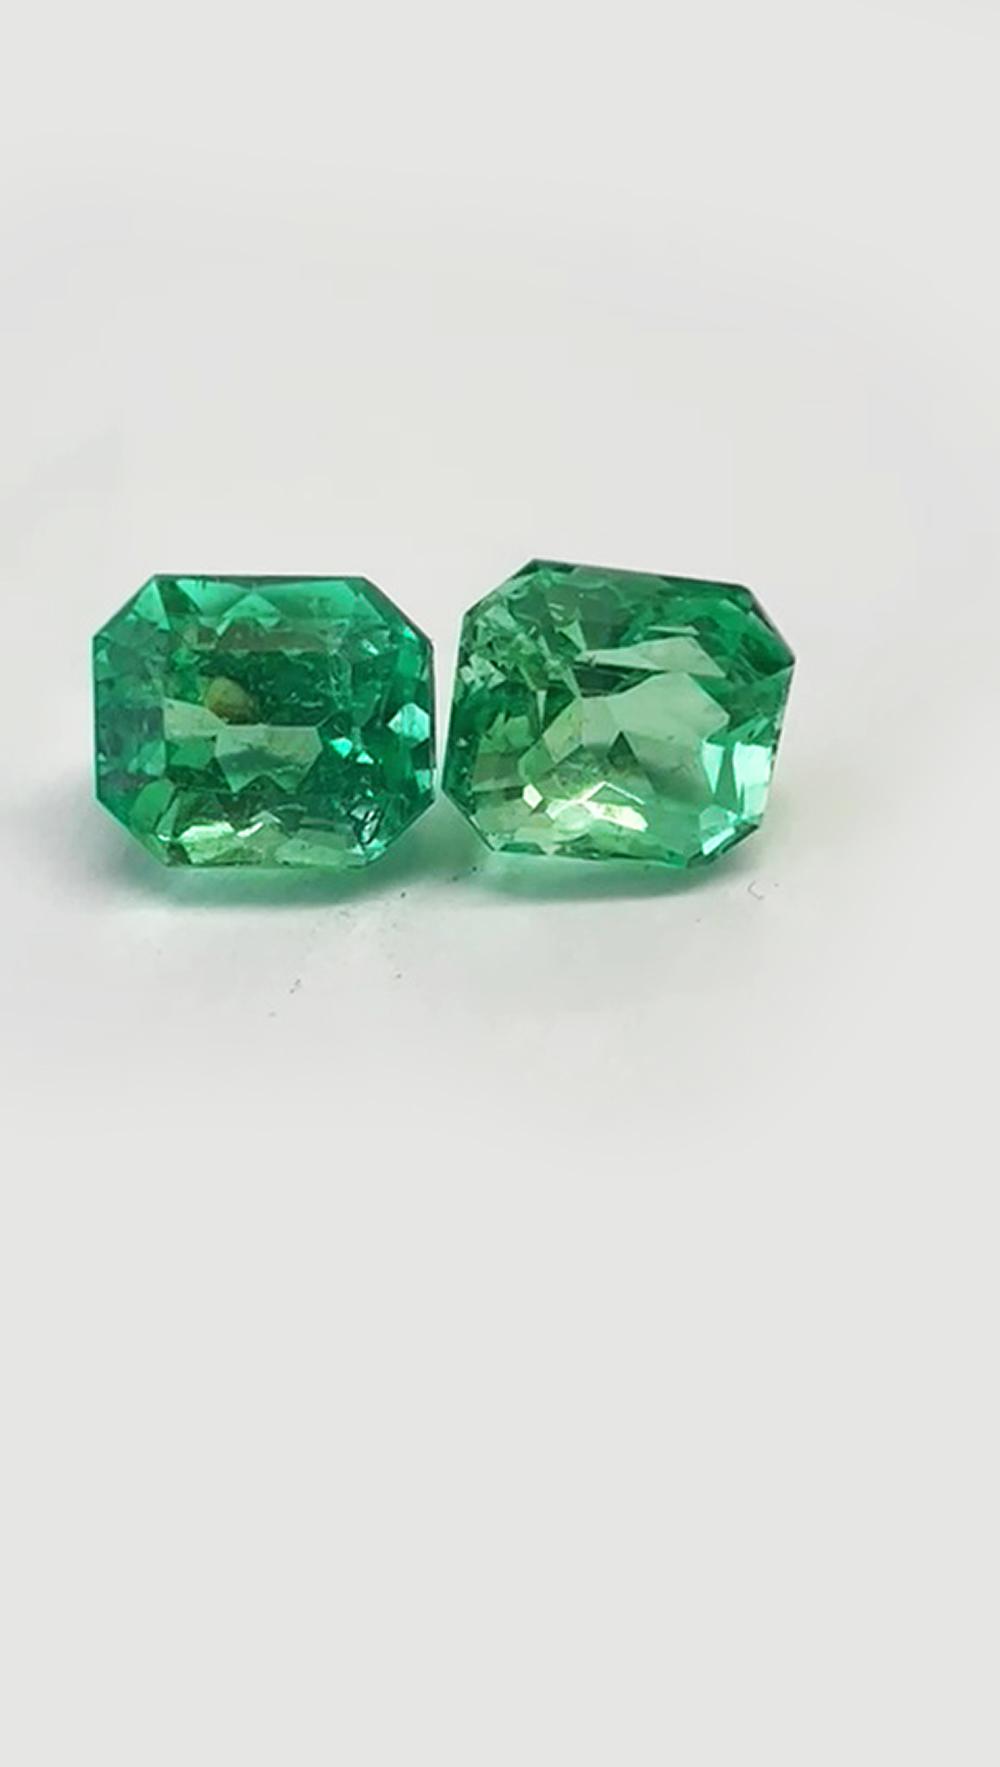 5.78 Ct. Colombian Emerald Pair ( Exceptional )